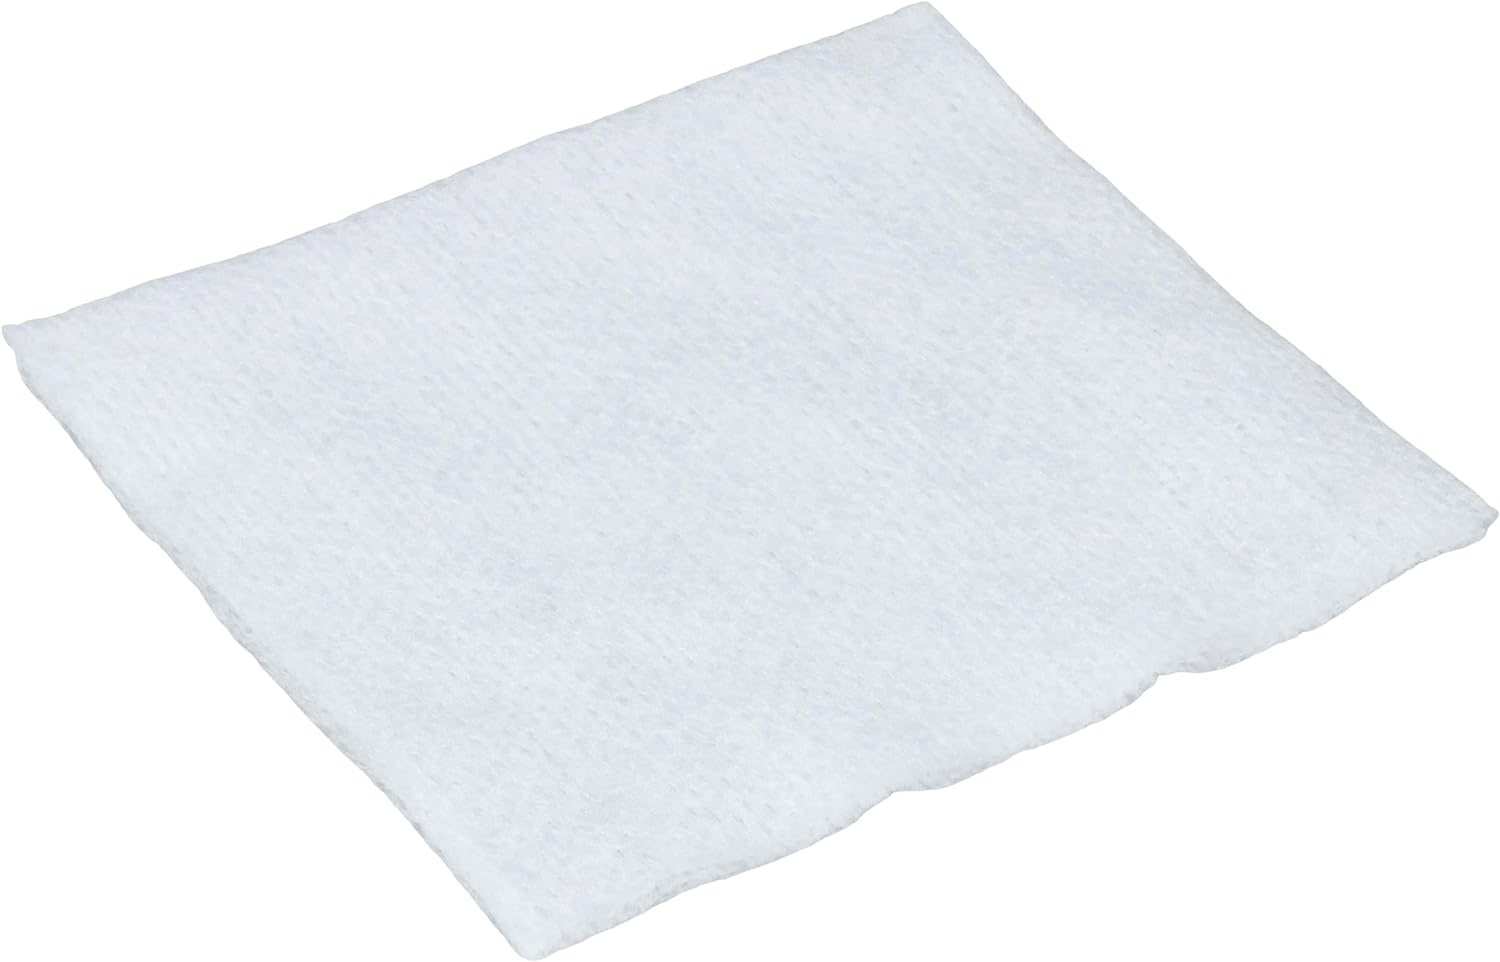 Henry Schein Premium Gauze, Rayon/Polyester Blend Non-Woven Sponges, 4 Ply Non-Sterile, 4-Ply, 200/Pack